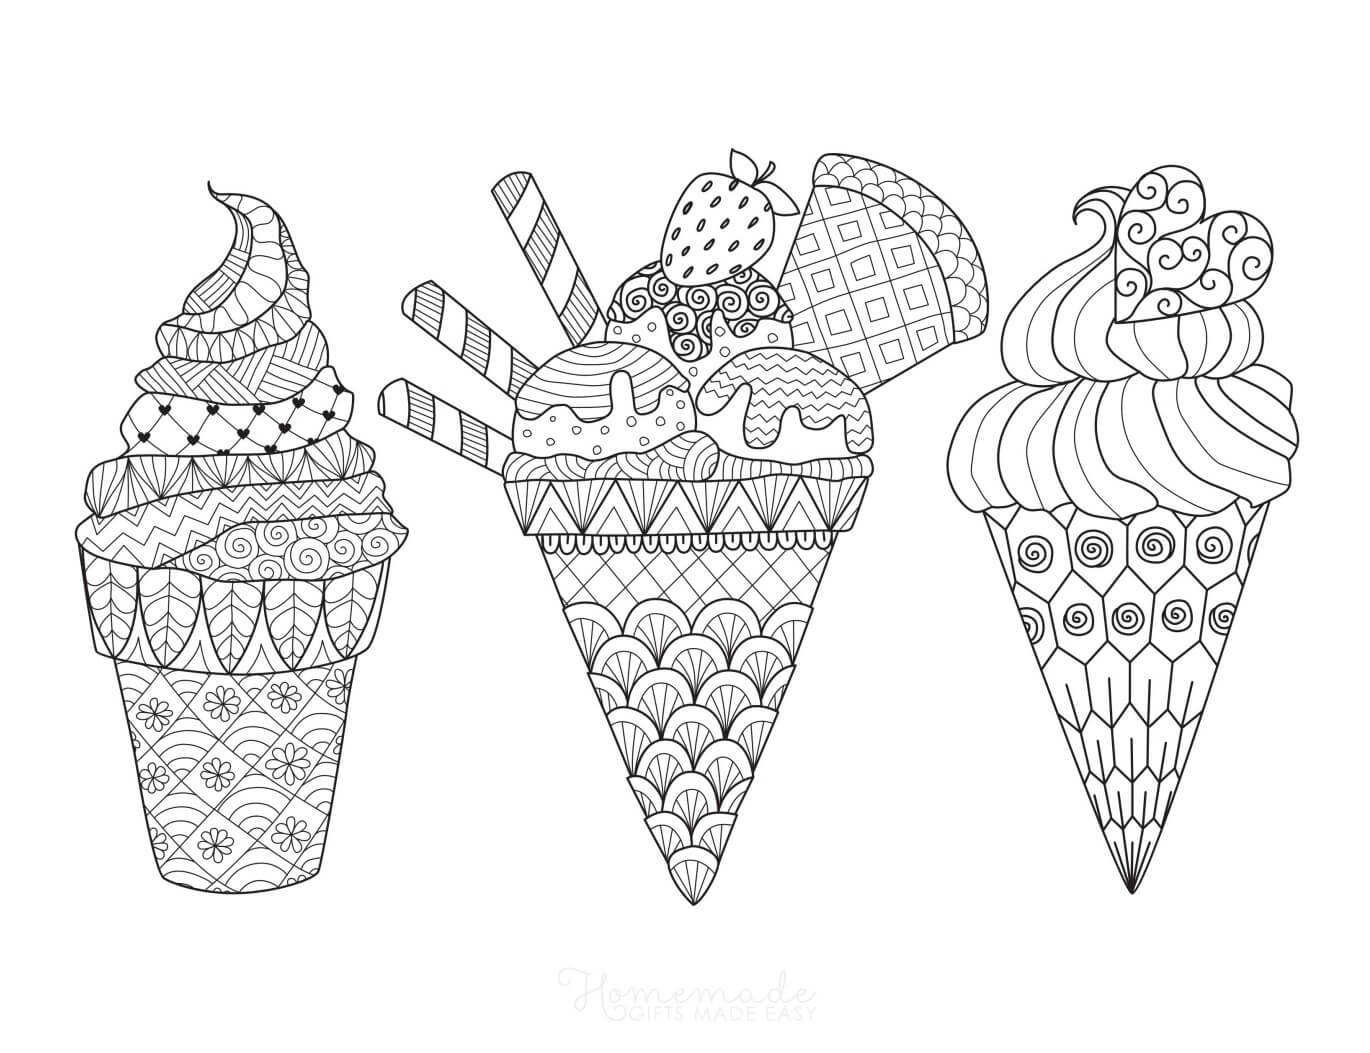 20 Printable Summer Coloring Pages for Adults & Kids   Happier Human